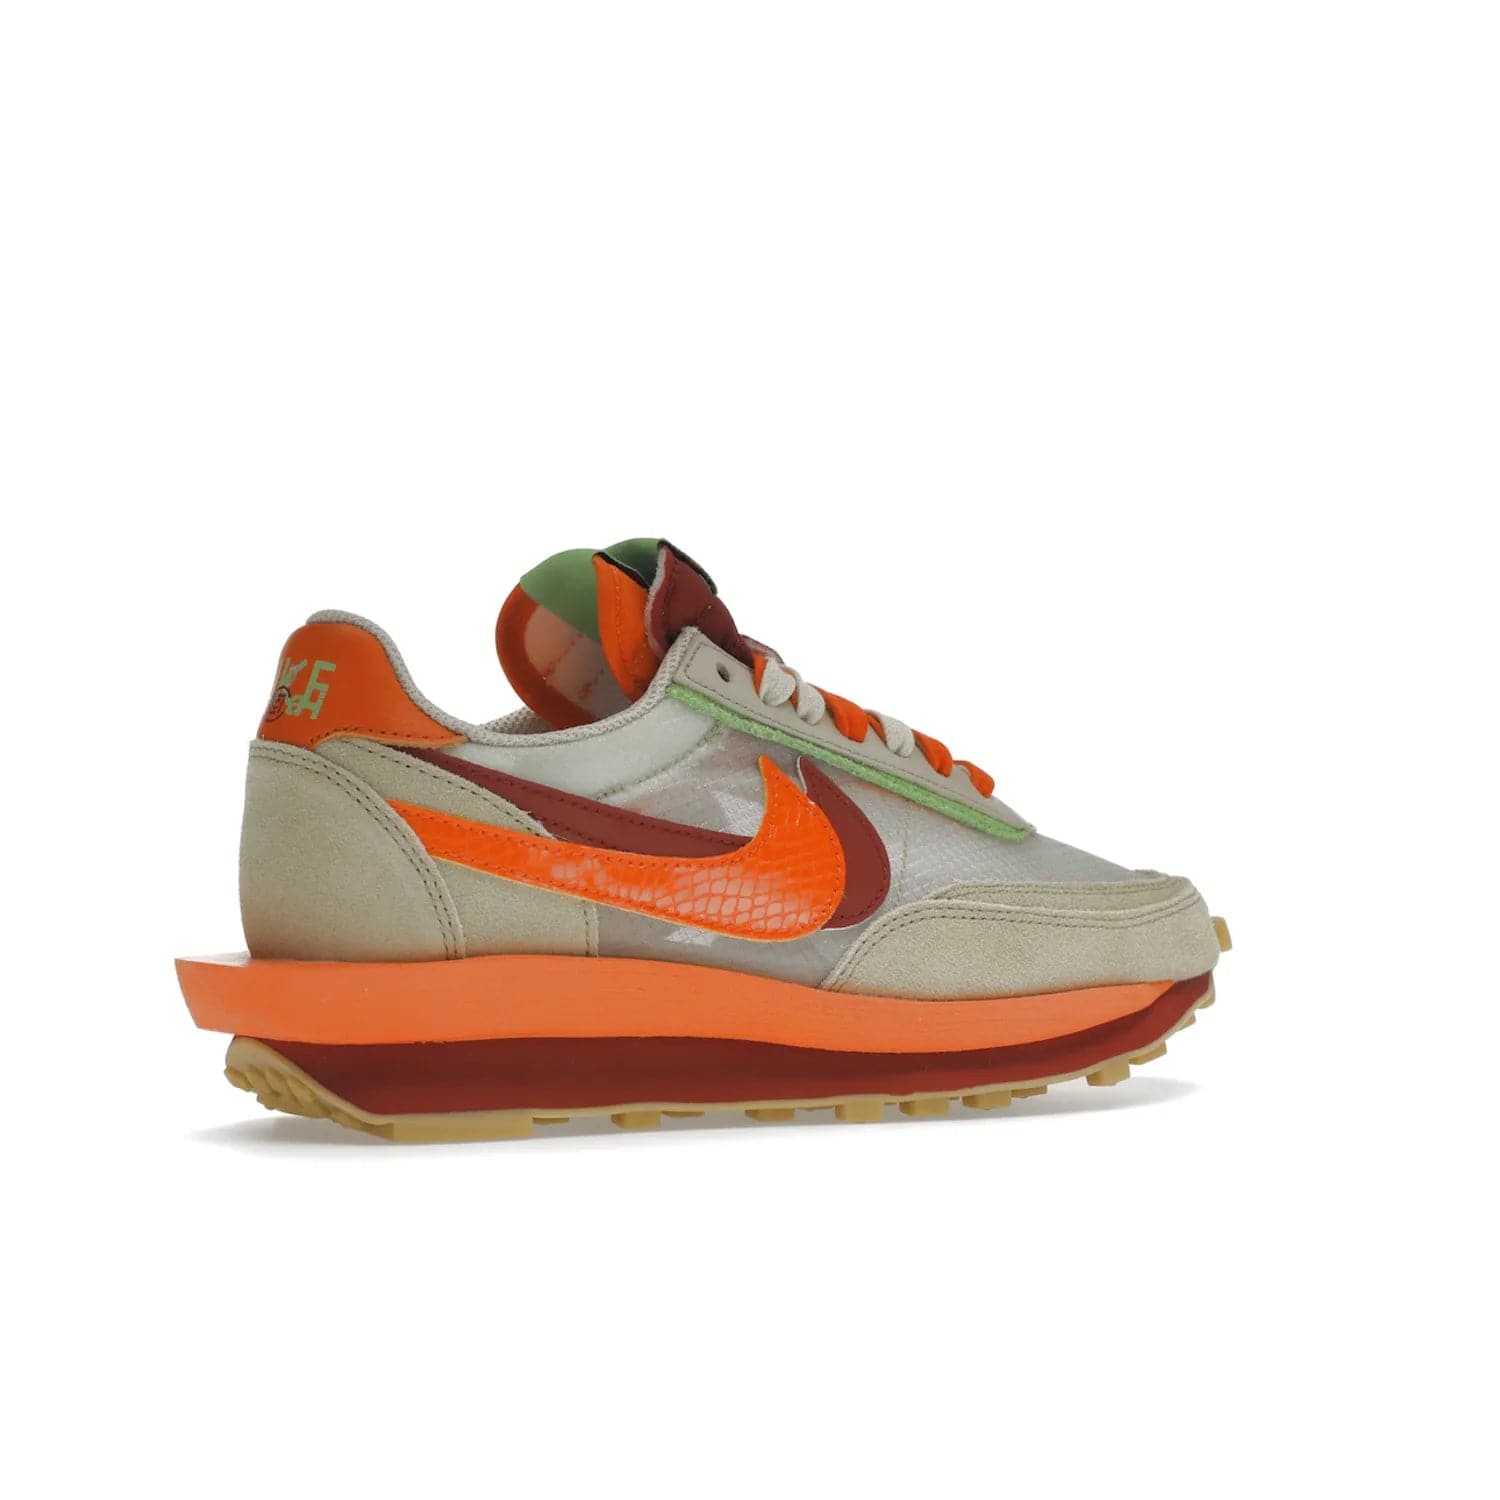 Nike LD Waffle sacai CLOT Kiss of Death Net Orange Blaze - Image 34 - Only at www.BallersClubKickz.com - A bold and stylish Nike LD Waffle sacai CLOT Kiss of Death Net Orange Blaze sneaker featuring a unique off-white, Deep Red & Orange Blaze Swooshes, two-toned stacked sole and doubled tongue. Available in September 2021. Make a statement.